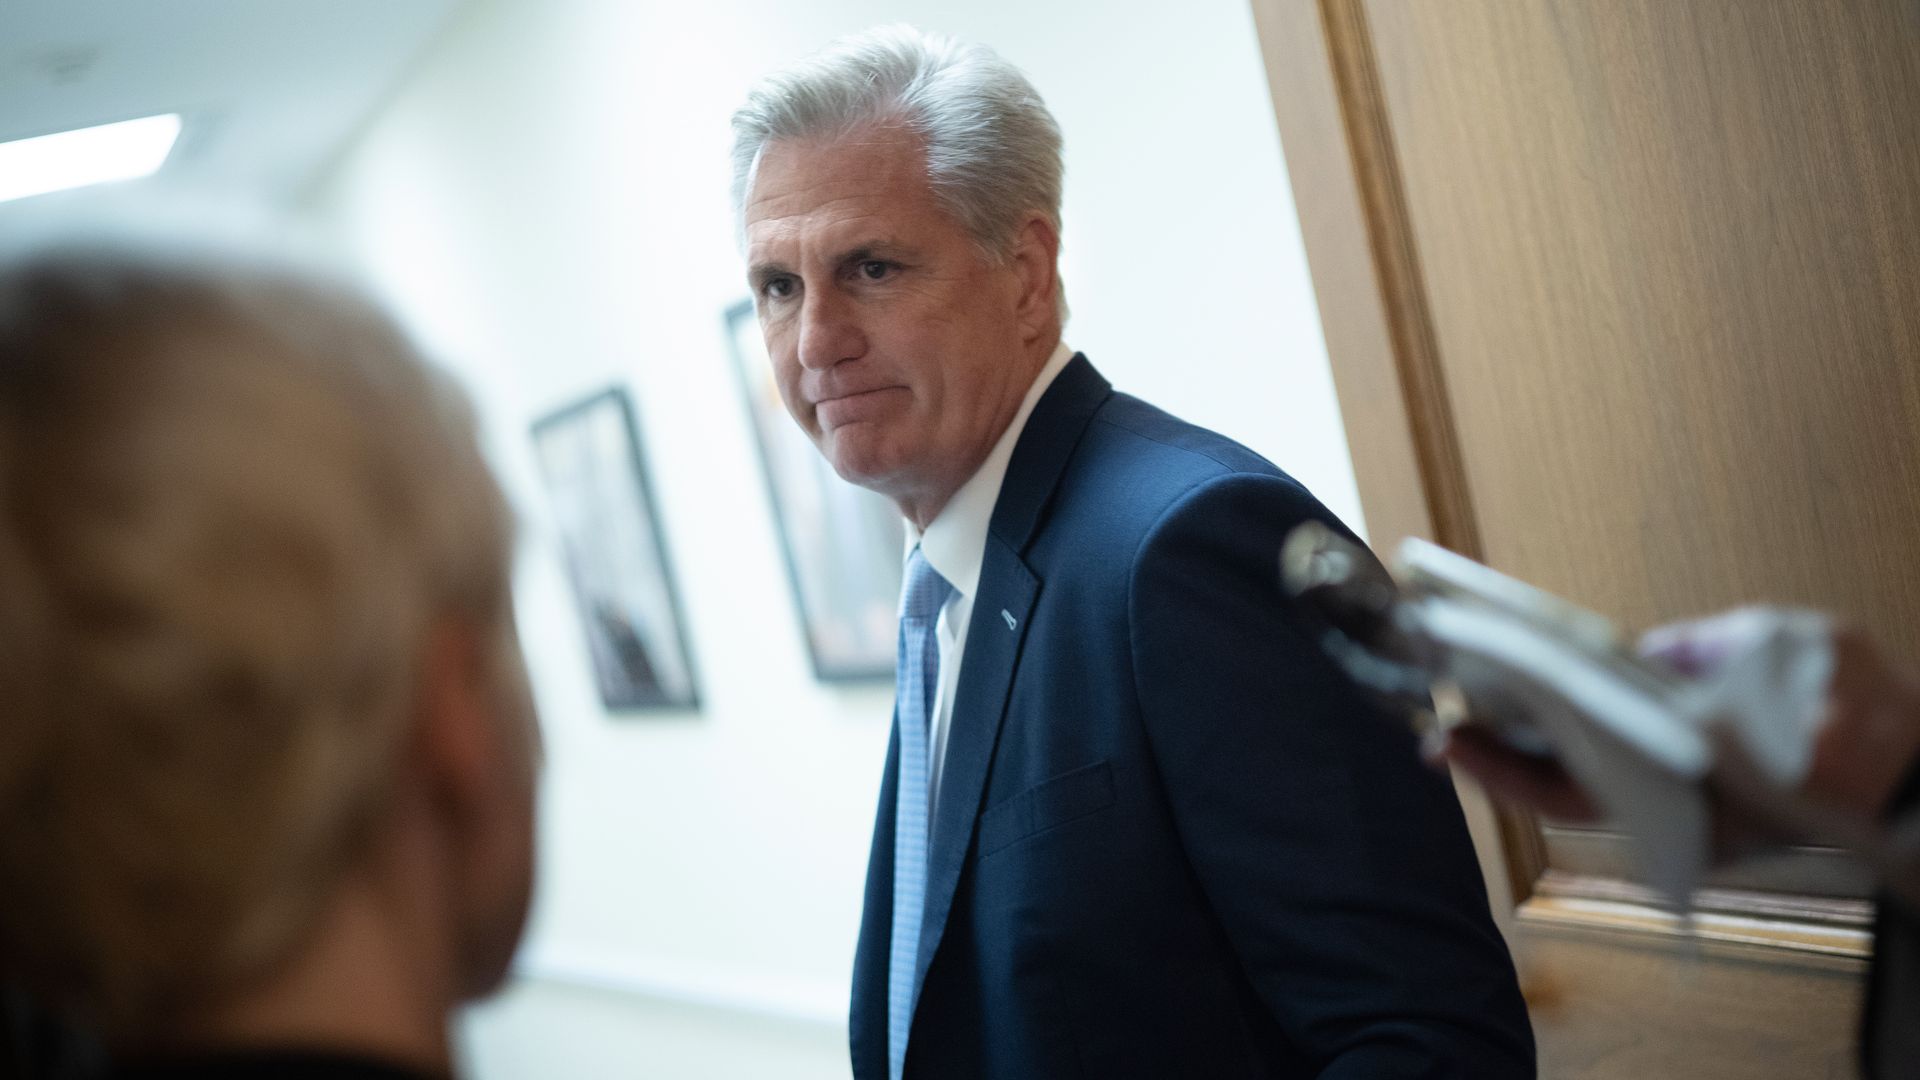 House Minority Leader Kevin McCarthy (R-Calif.) speaking with reporters in Washington, DC, in May 2021.